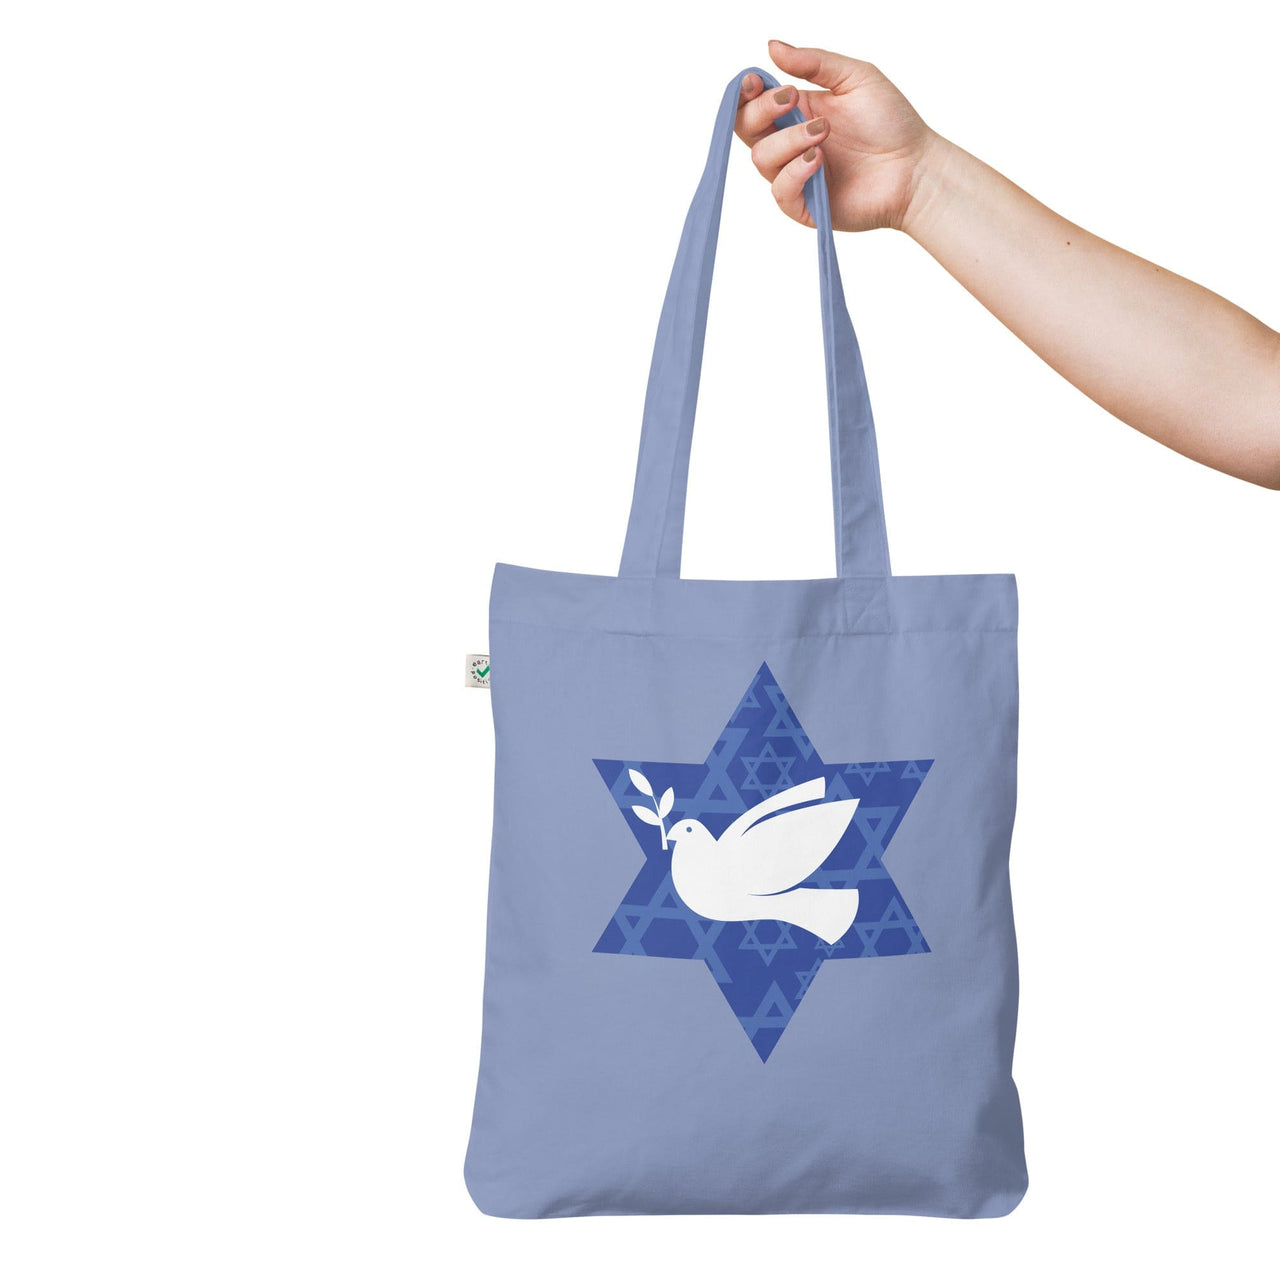 ModernTribe Apparel Tote Bags & Cases Denim Stand with Israel Organic Tote Bag - 100% of Profits Go to AFMDA